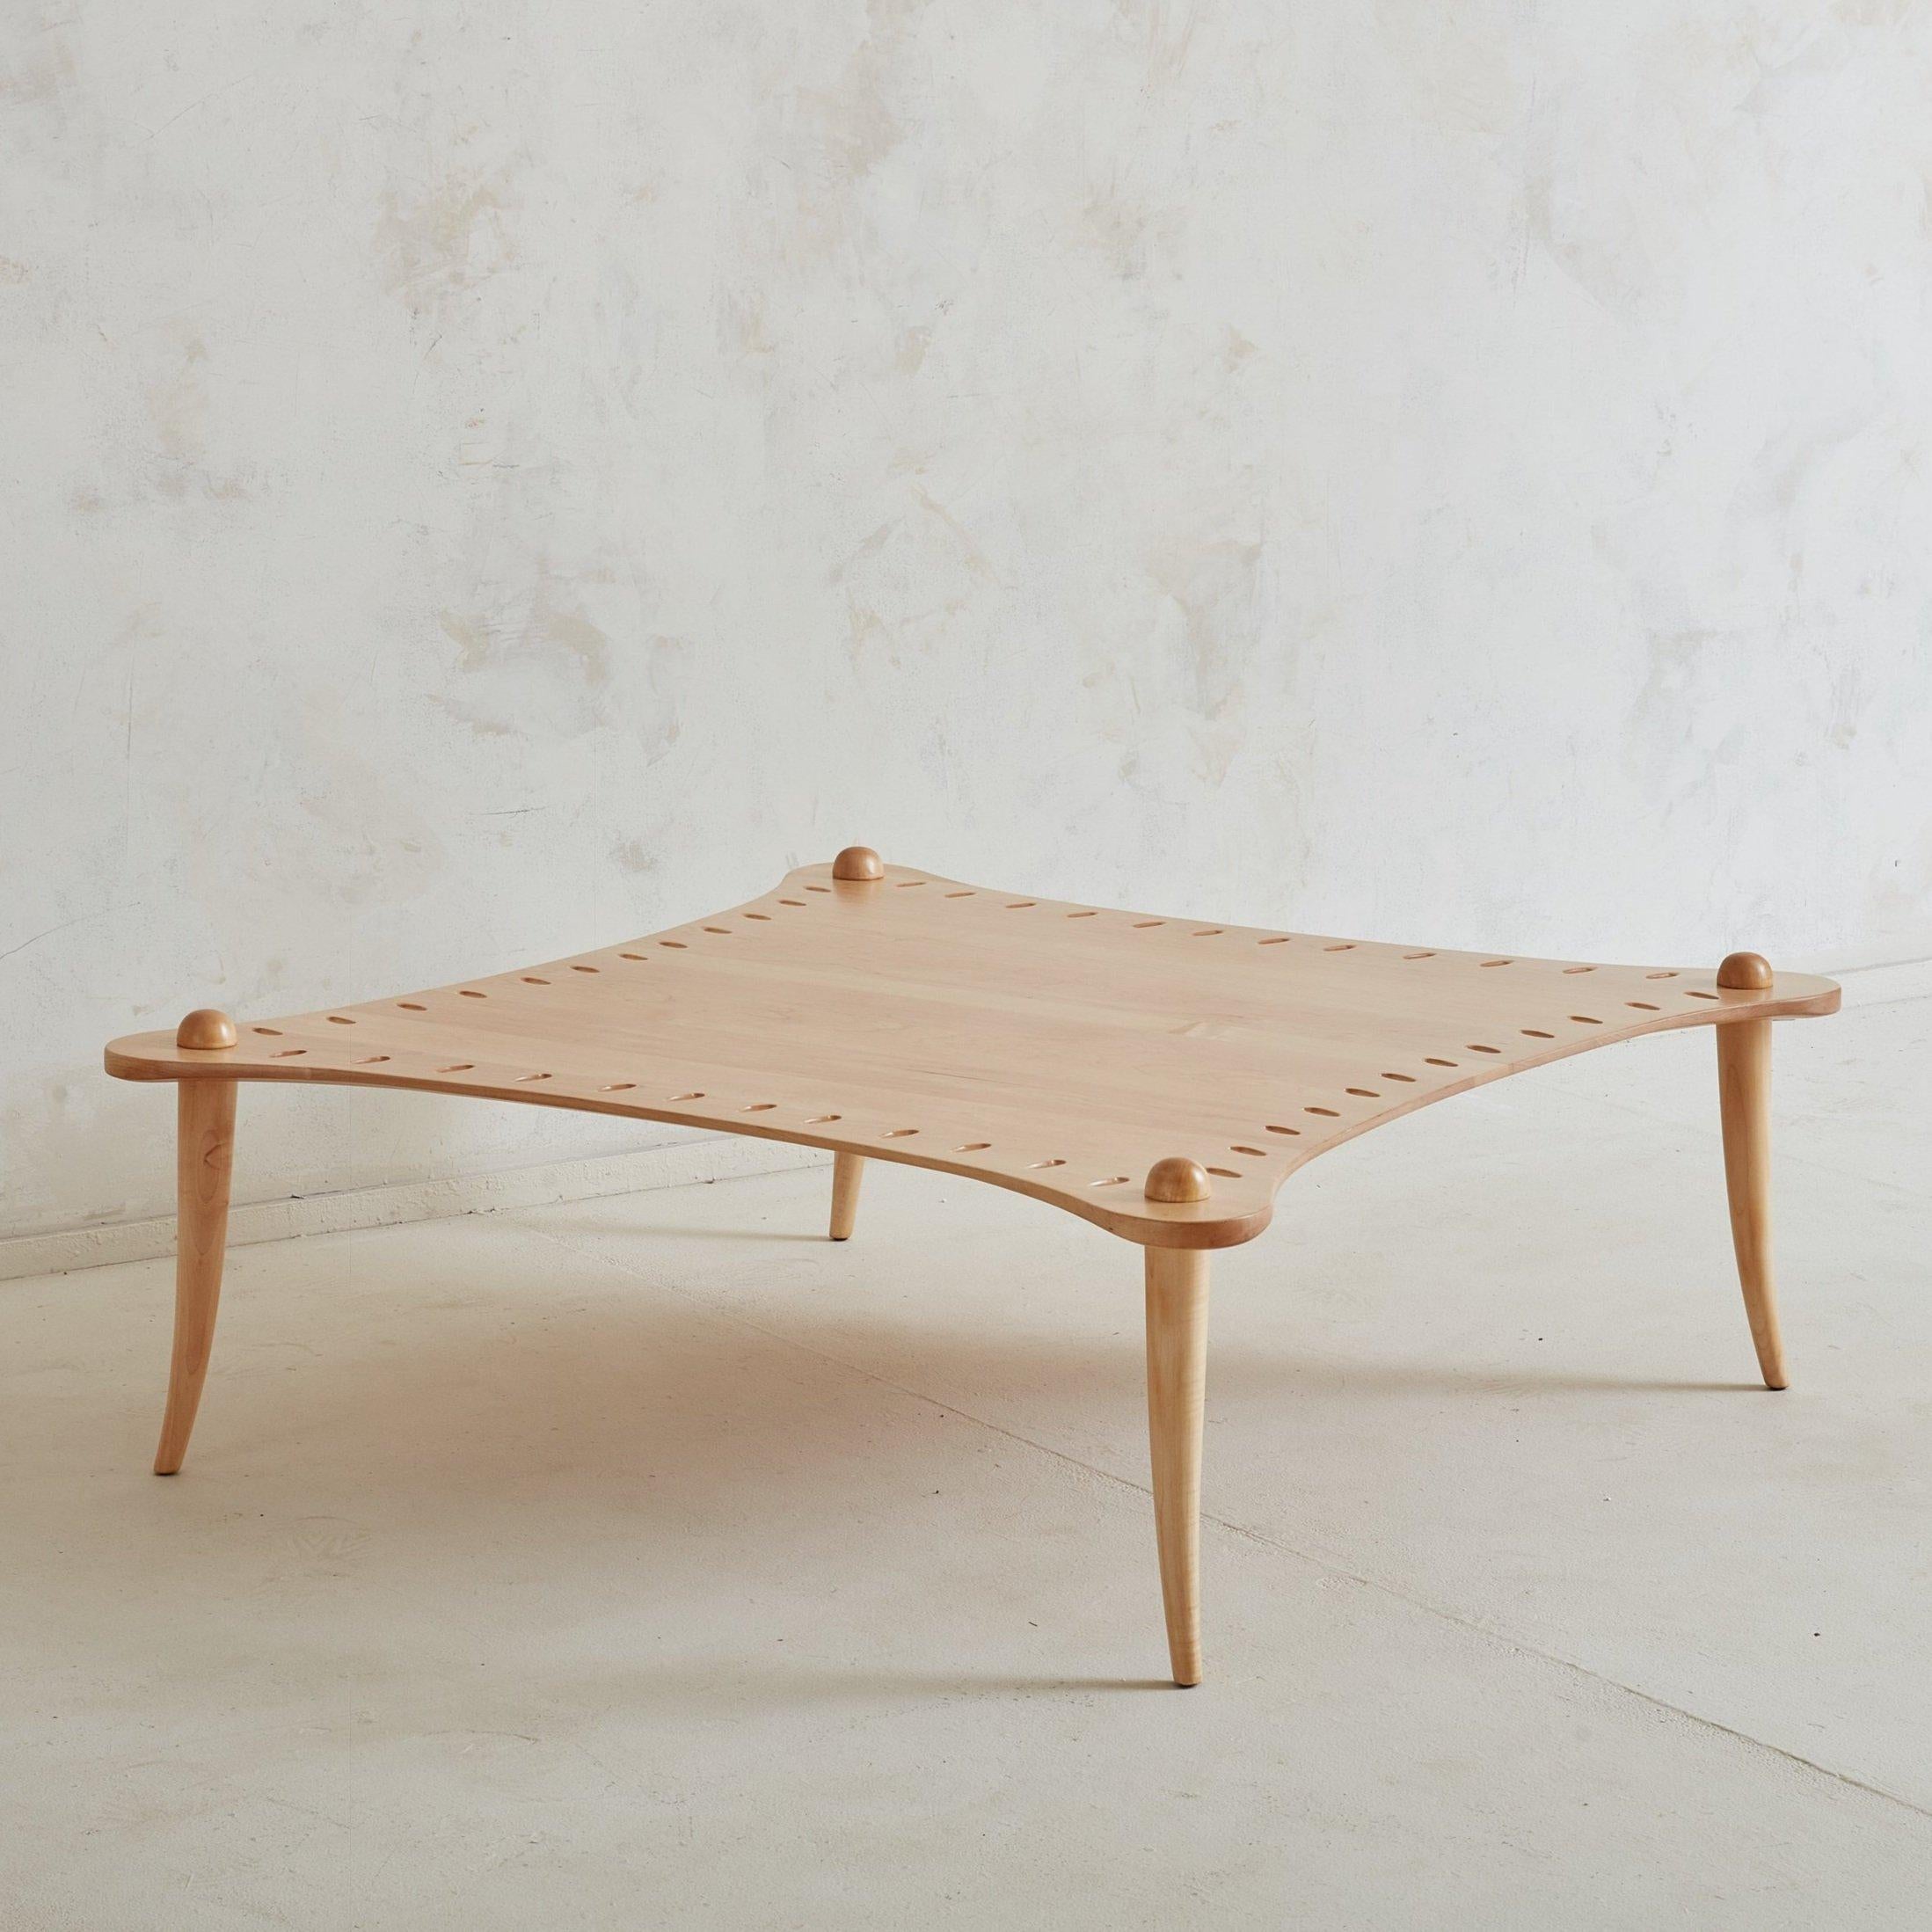 A curved vintage coffee table designed by Valérie Dementhon in 1991 for Artelano, which has been a French editor of high end furniture since 1972. 
DIMENSIONS: 43